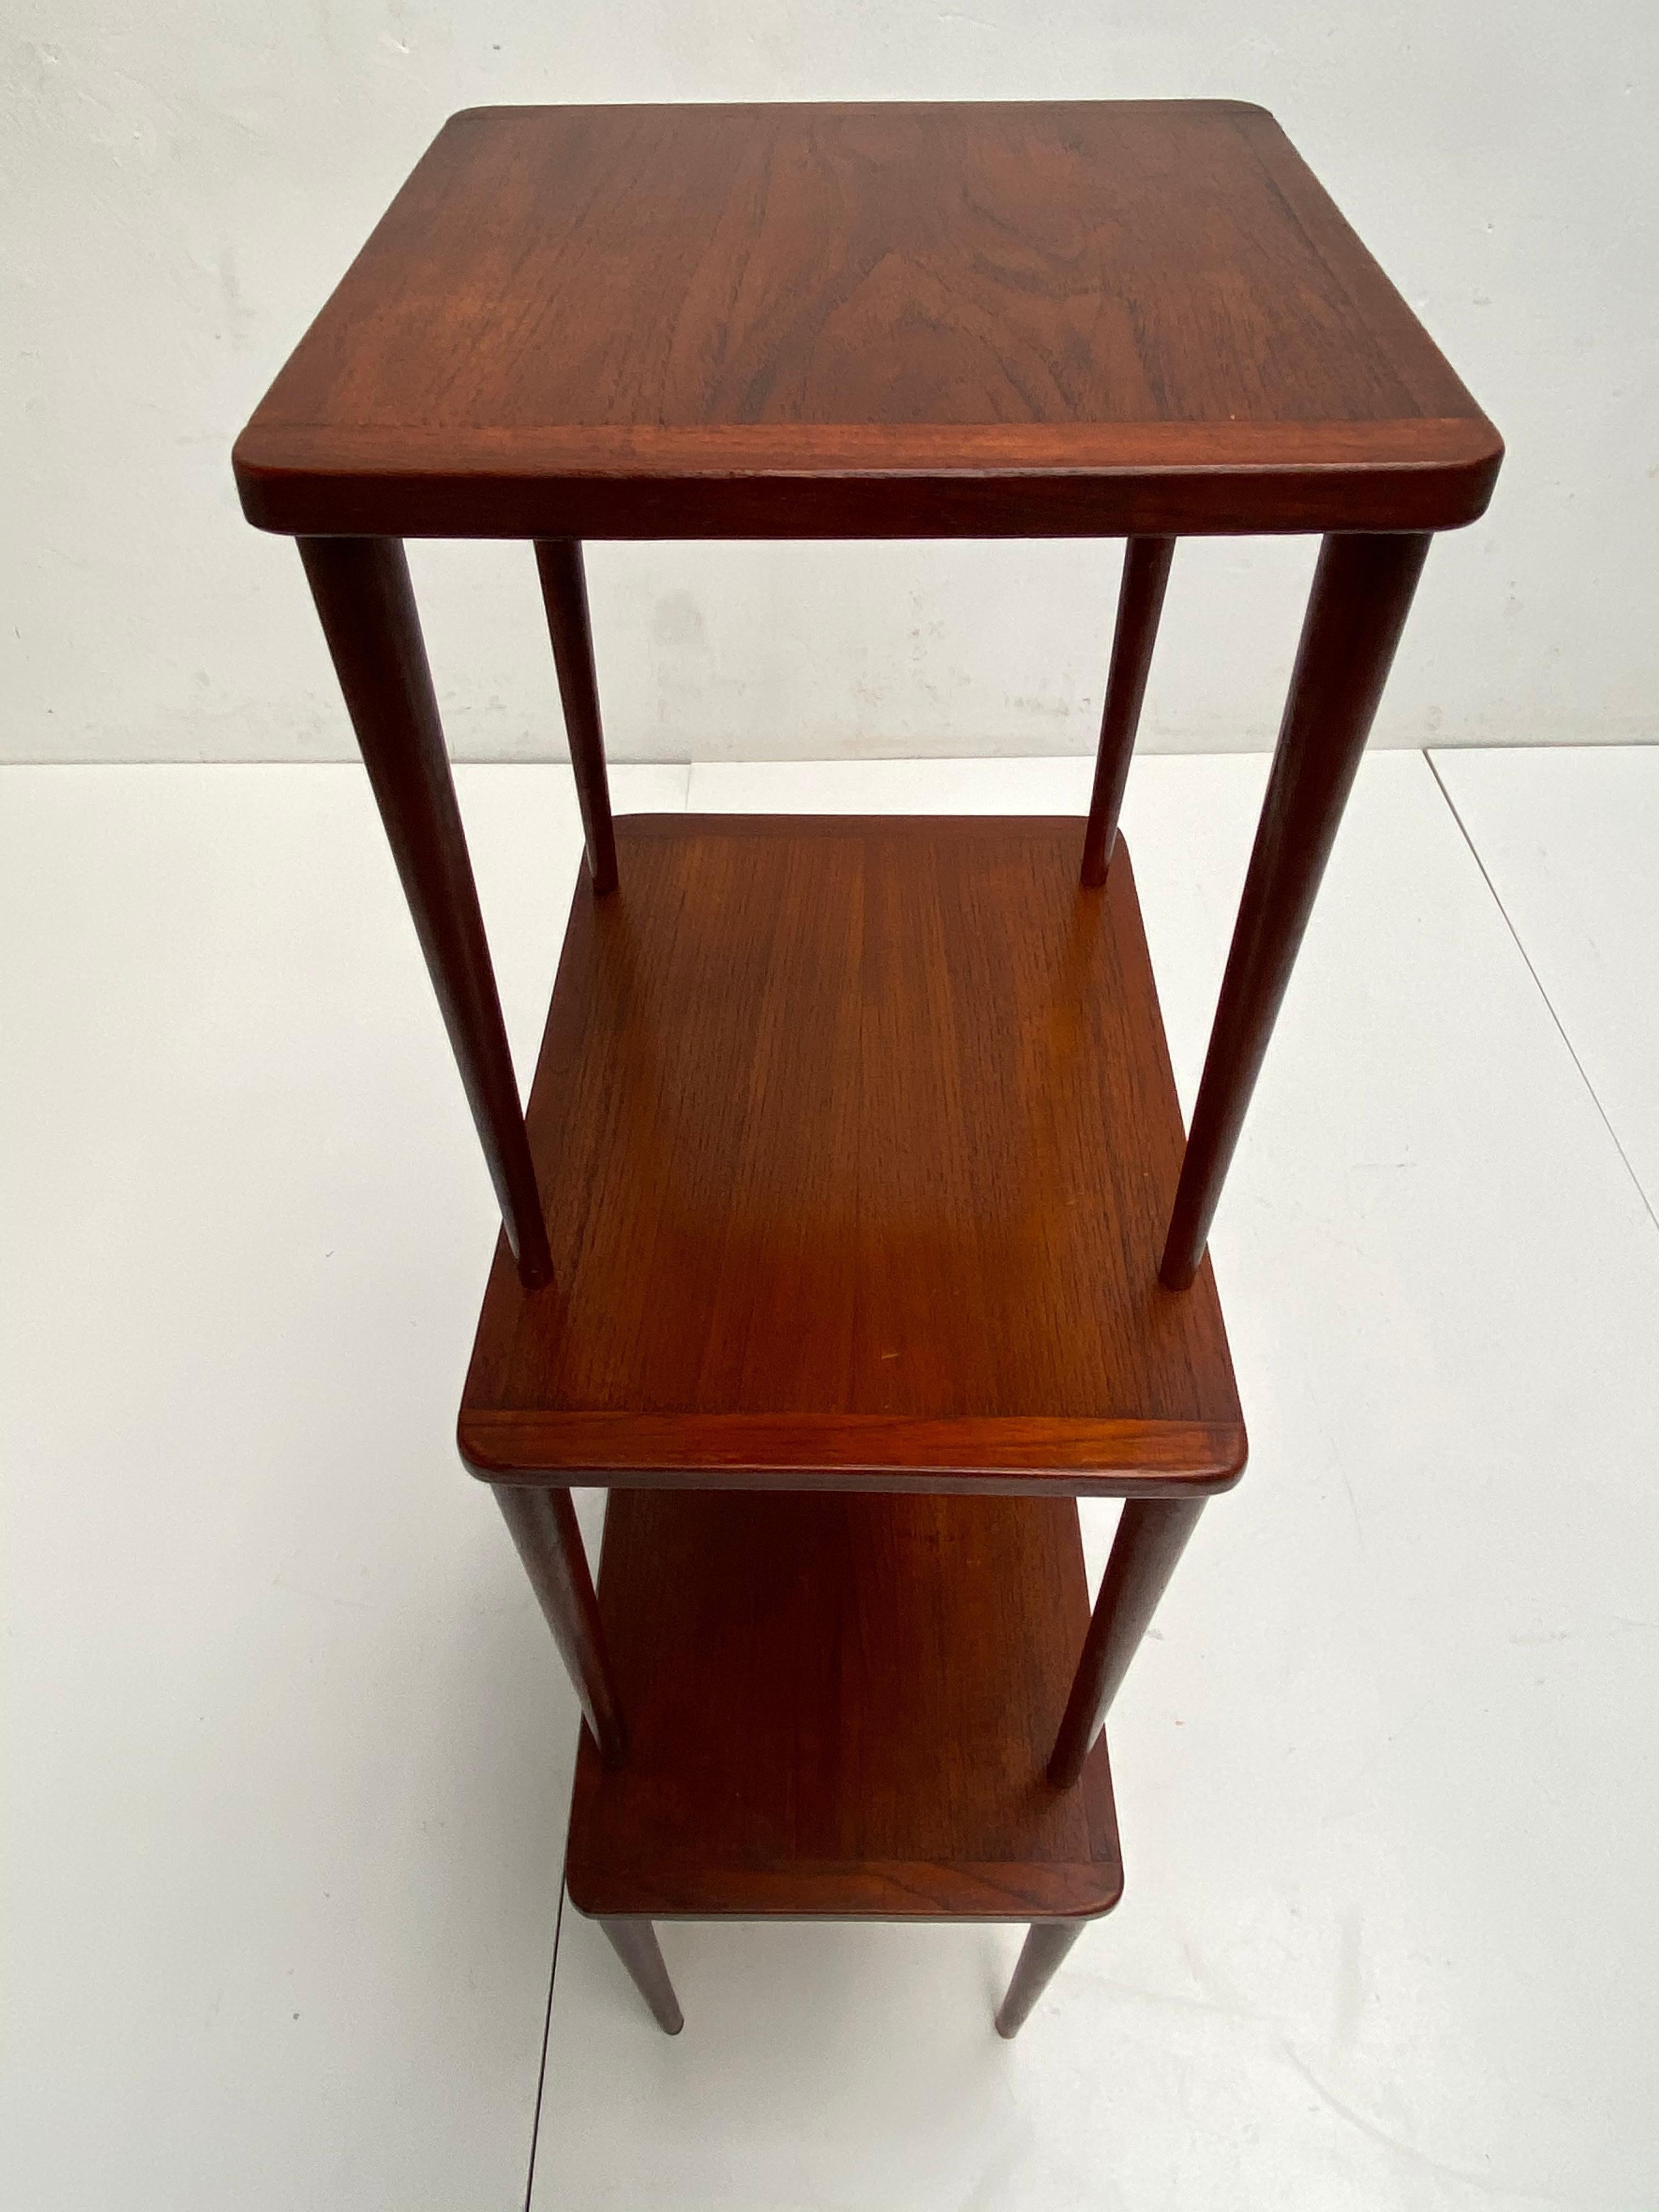 Set of Teak Nesting Tables, 1950s, Made in Denmark In Good Condition For Sale In Bergen op Zoom, NL